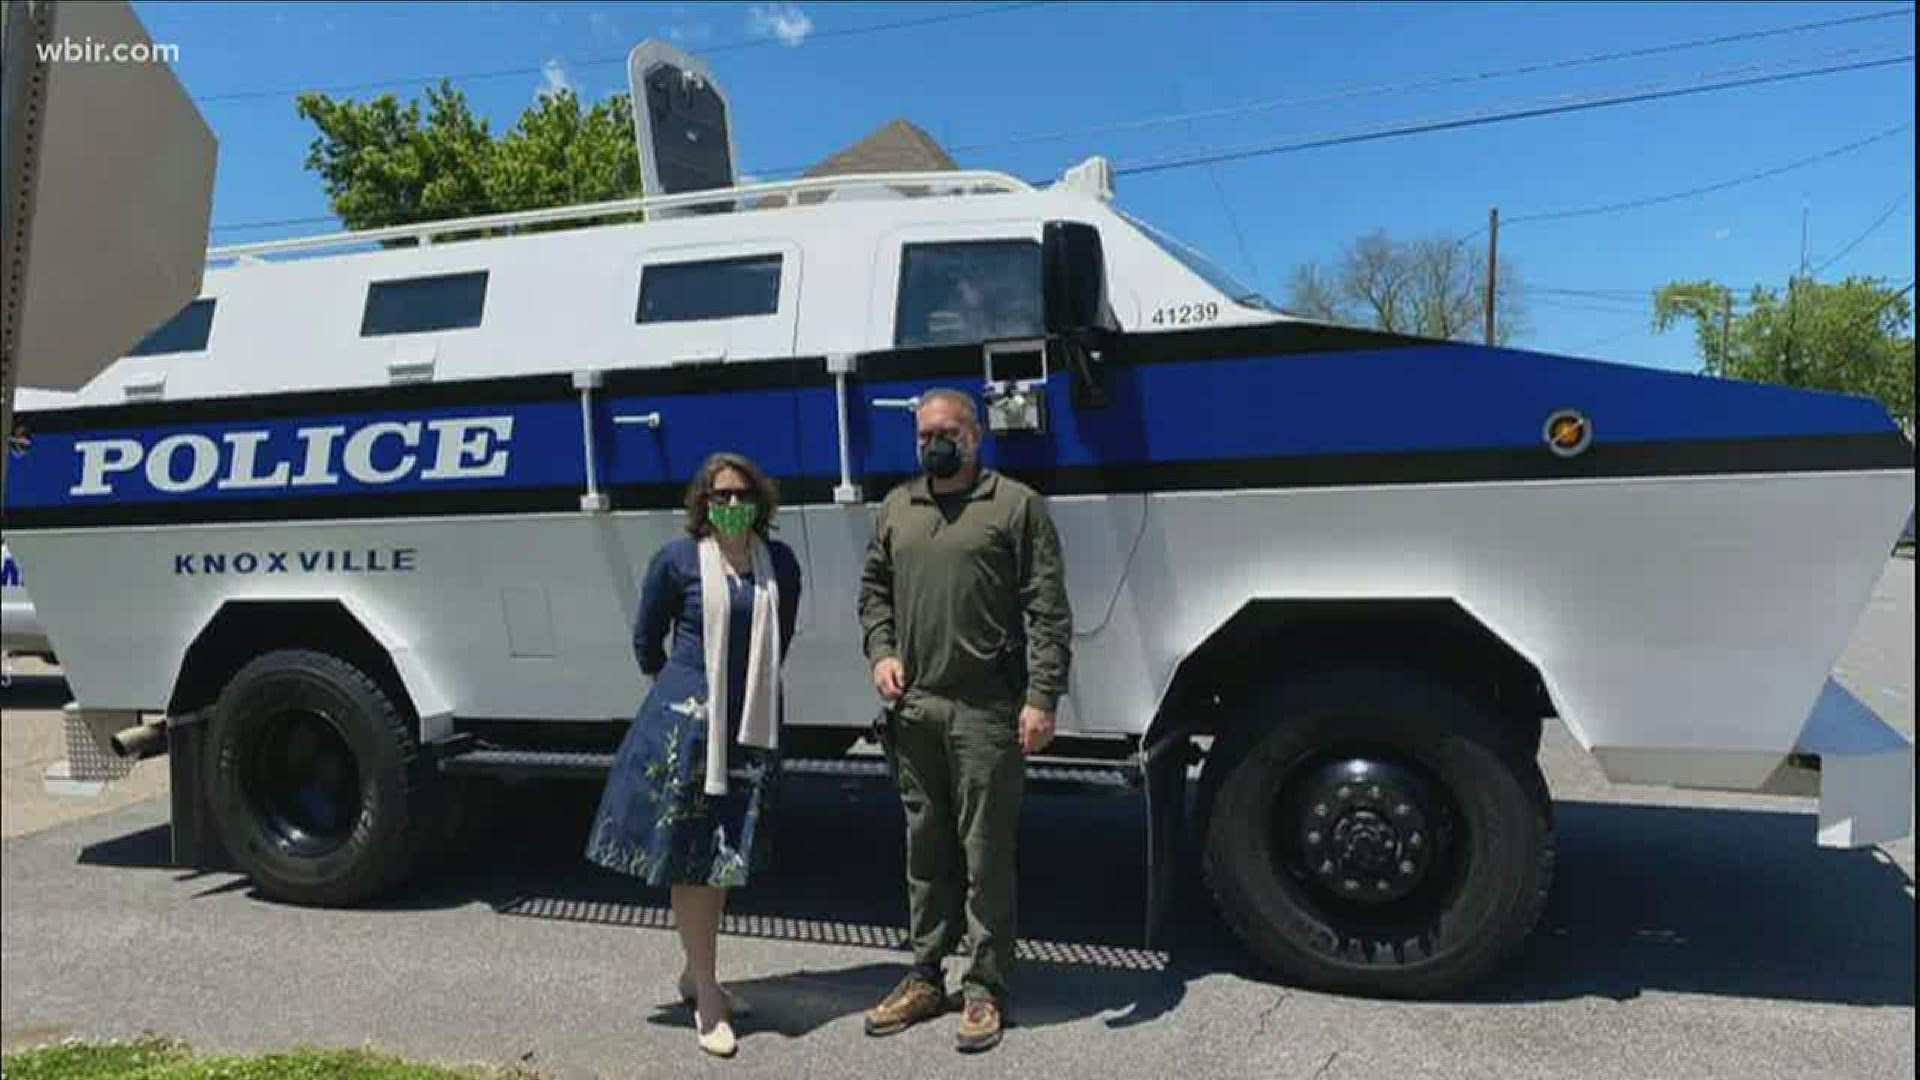 What Was That Armored Police Vehicle At The Big Honk In Knox County